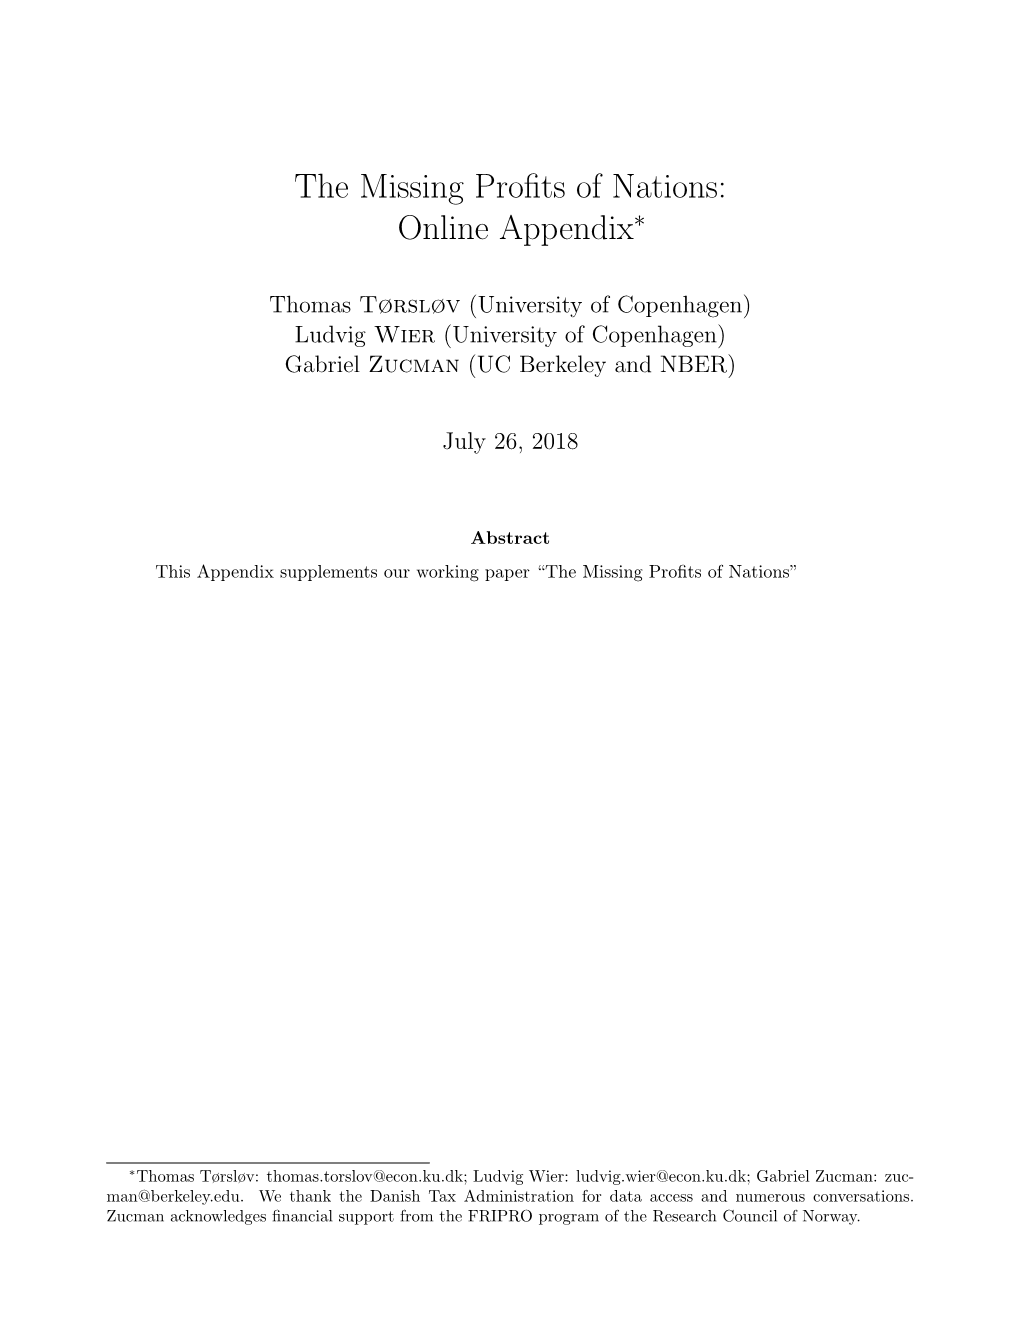 The Missing Profits of Nations: Online Appendix